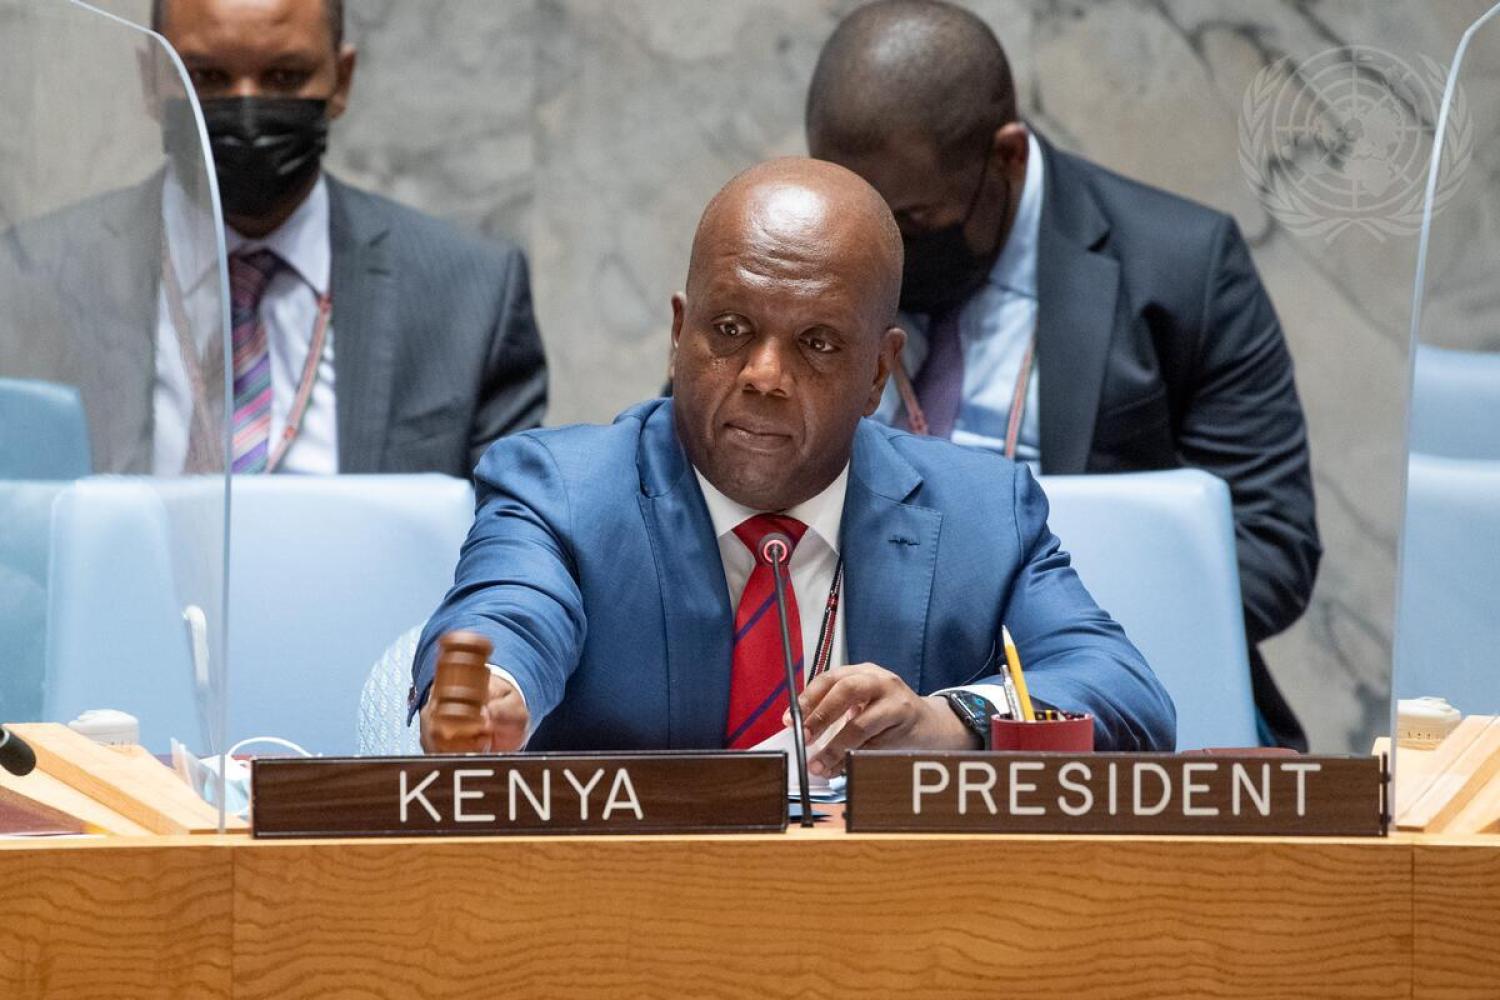 Martin Kimani, Permanent Representative of Kenya to the United Nations, serving as President of the Security Council in October 2021 (Eskinder Debebe/UN Photo)